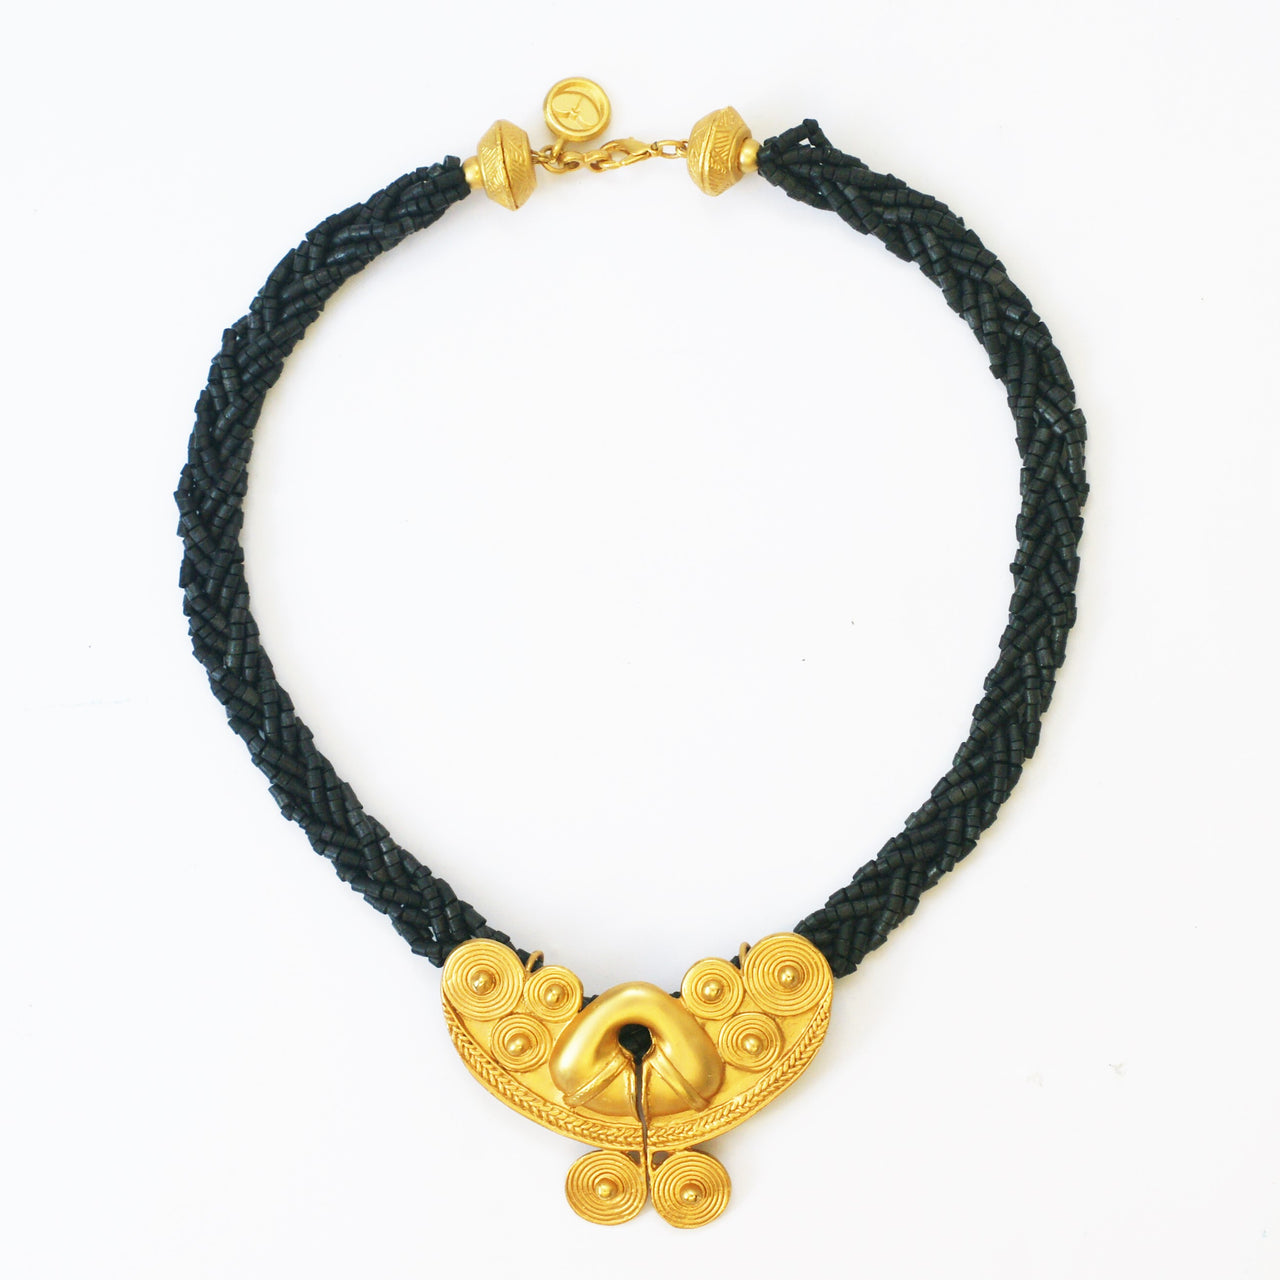 plaited black beads and matt gold plated front vintage necklace on white background